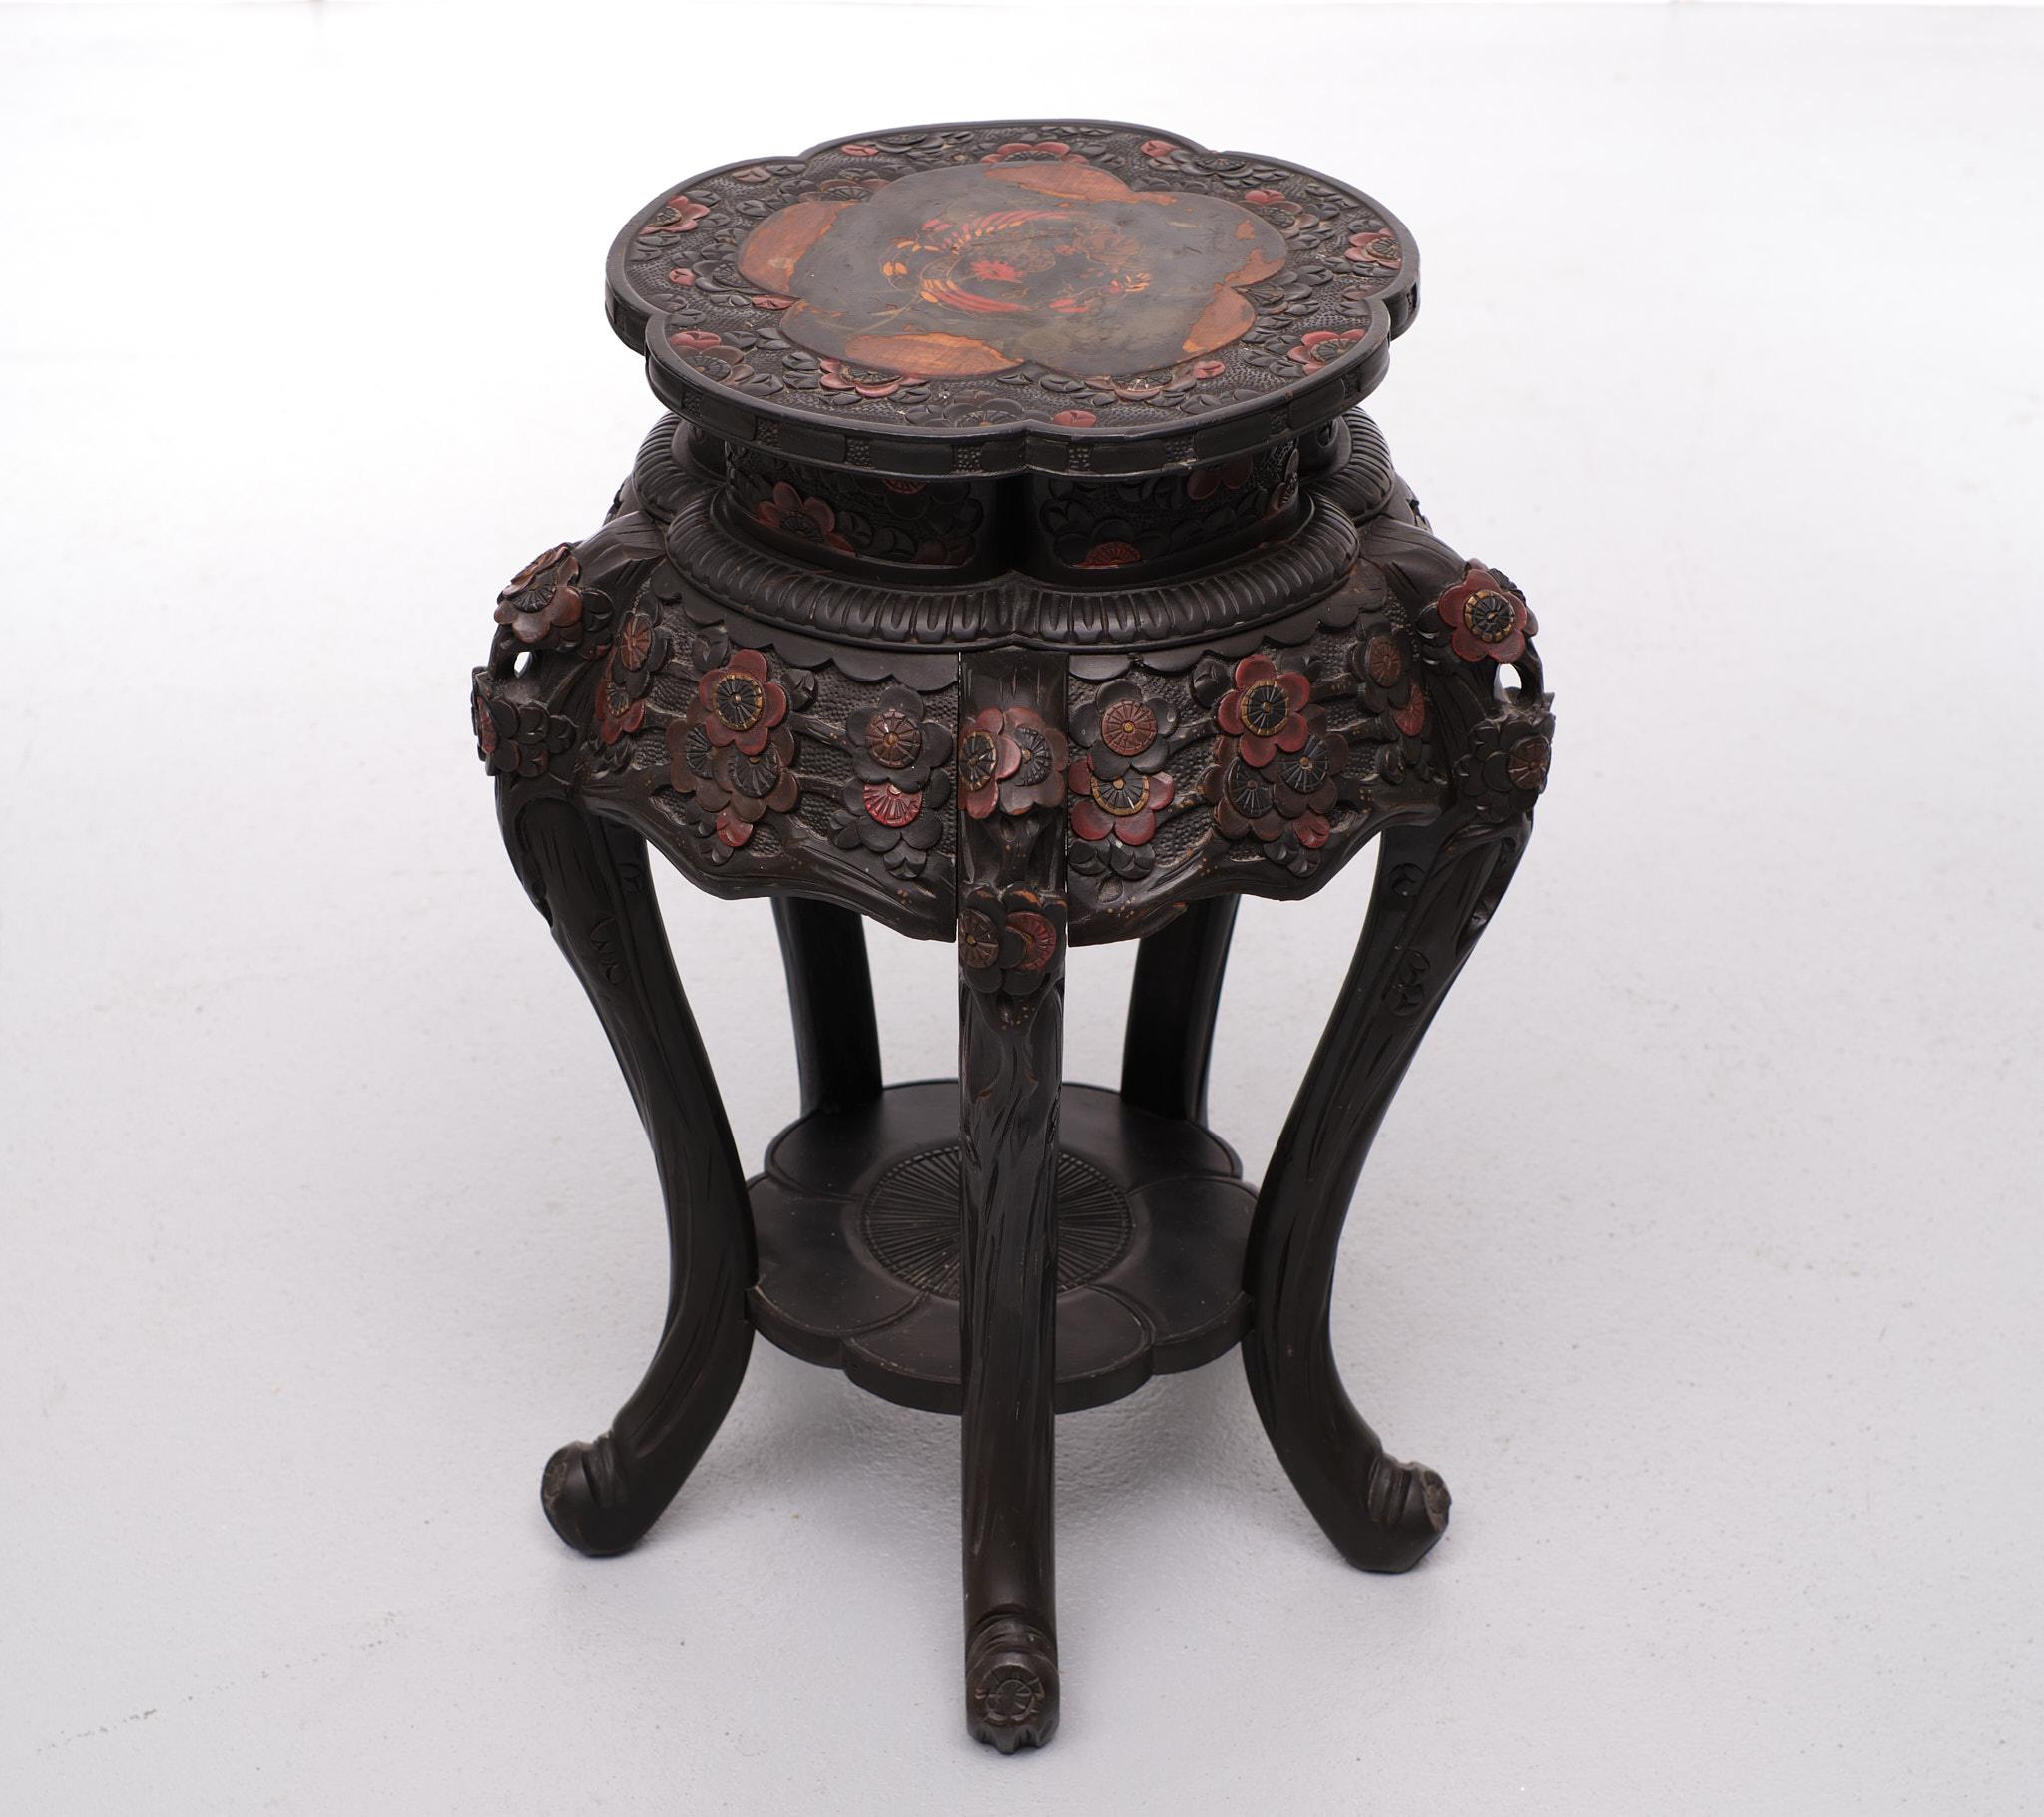 Very nice Chinese side table. Black base hand carved
with colored flowers. On top a painted bird, some wear on the top of the table. 
Probably bin damaged by a flower pot.